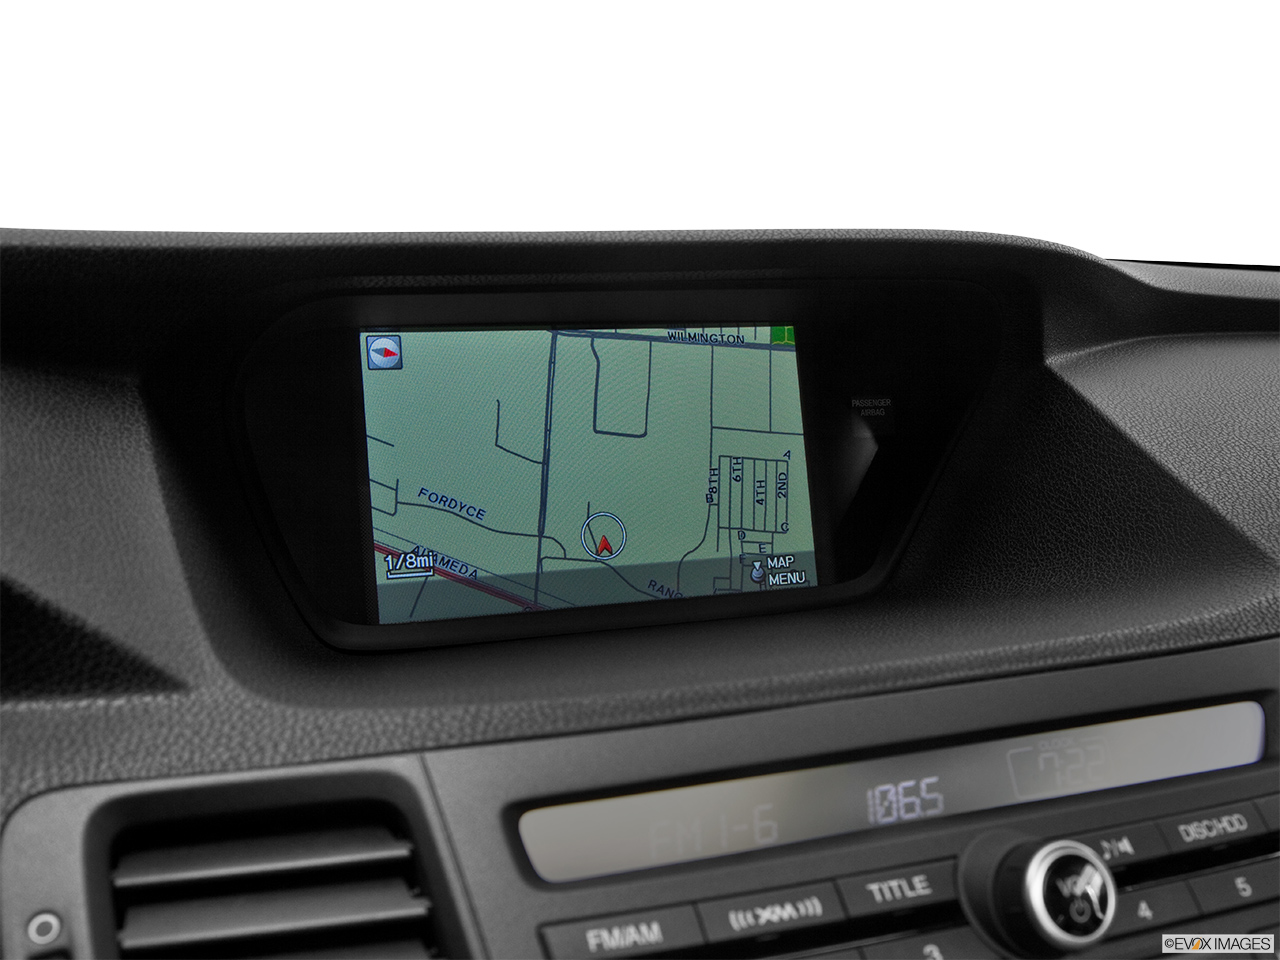 2013 Acura TSX 5-Speed Automatic Driver position view of navigation system. 